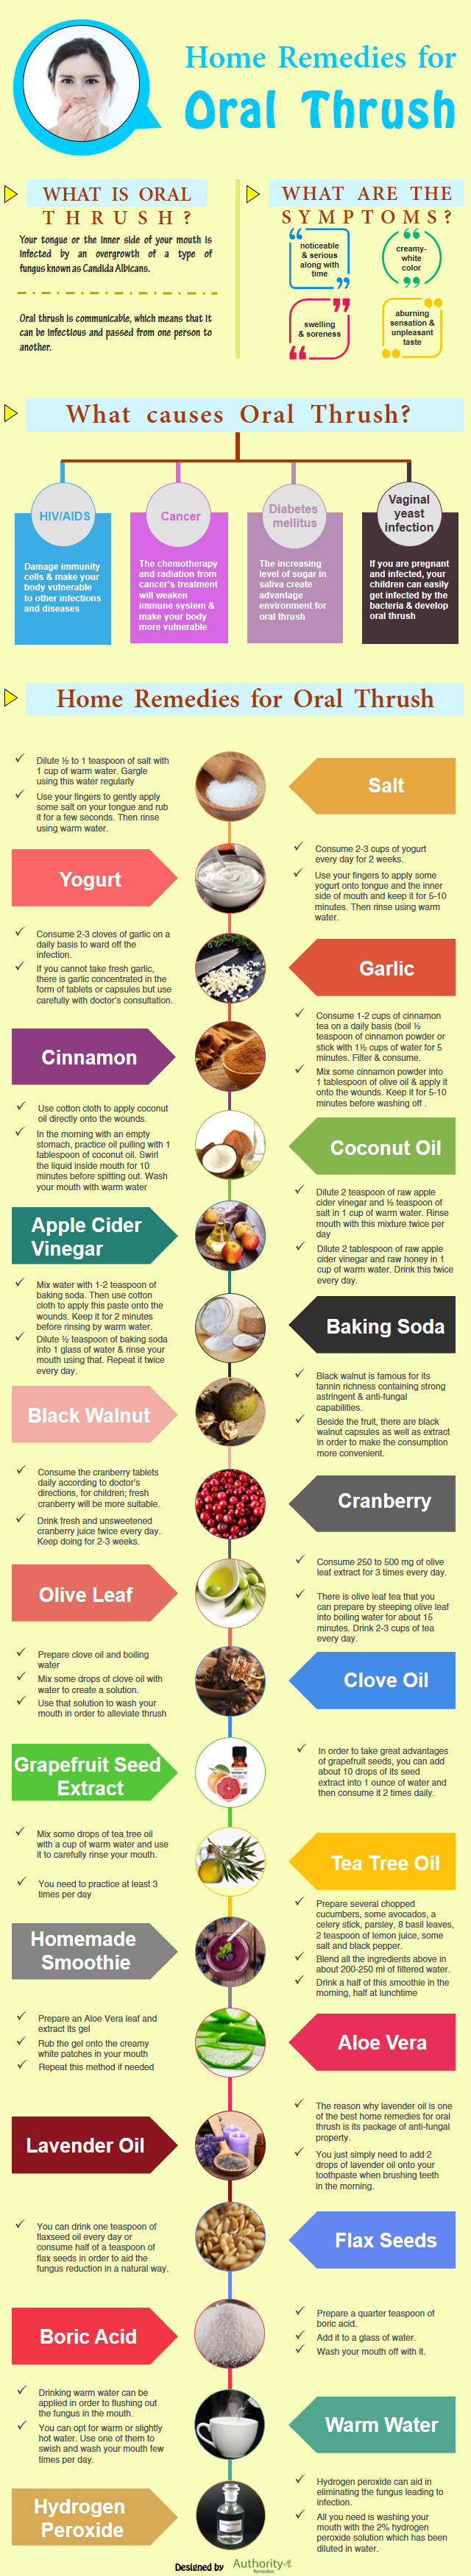 Effective Home Remedies for Oral Thrush - Infographic